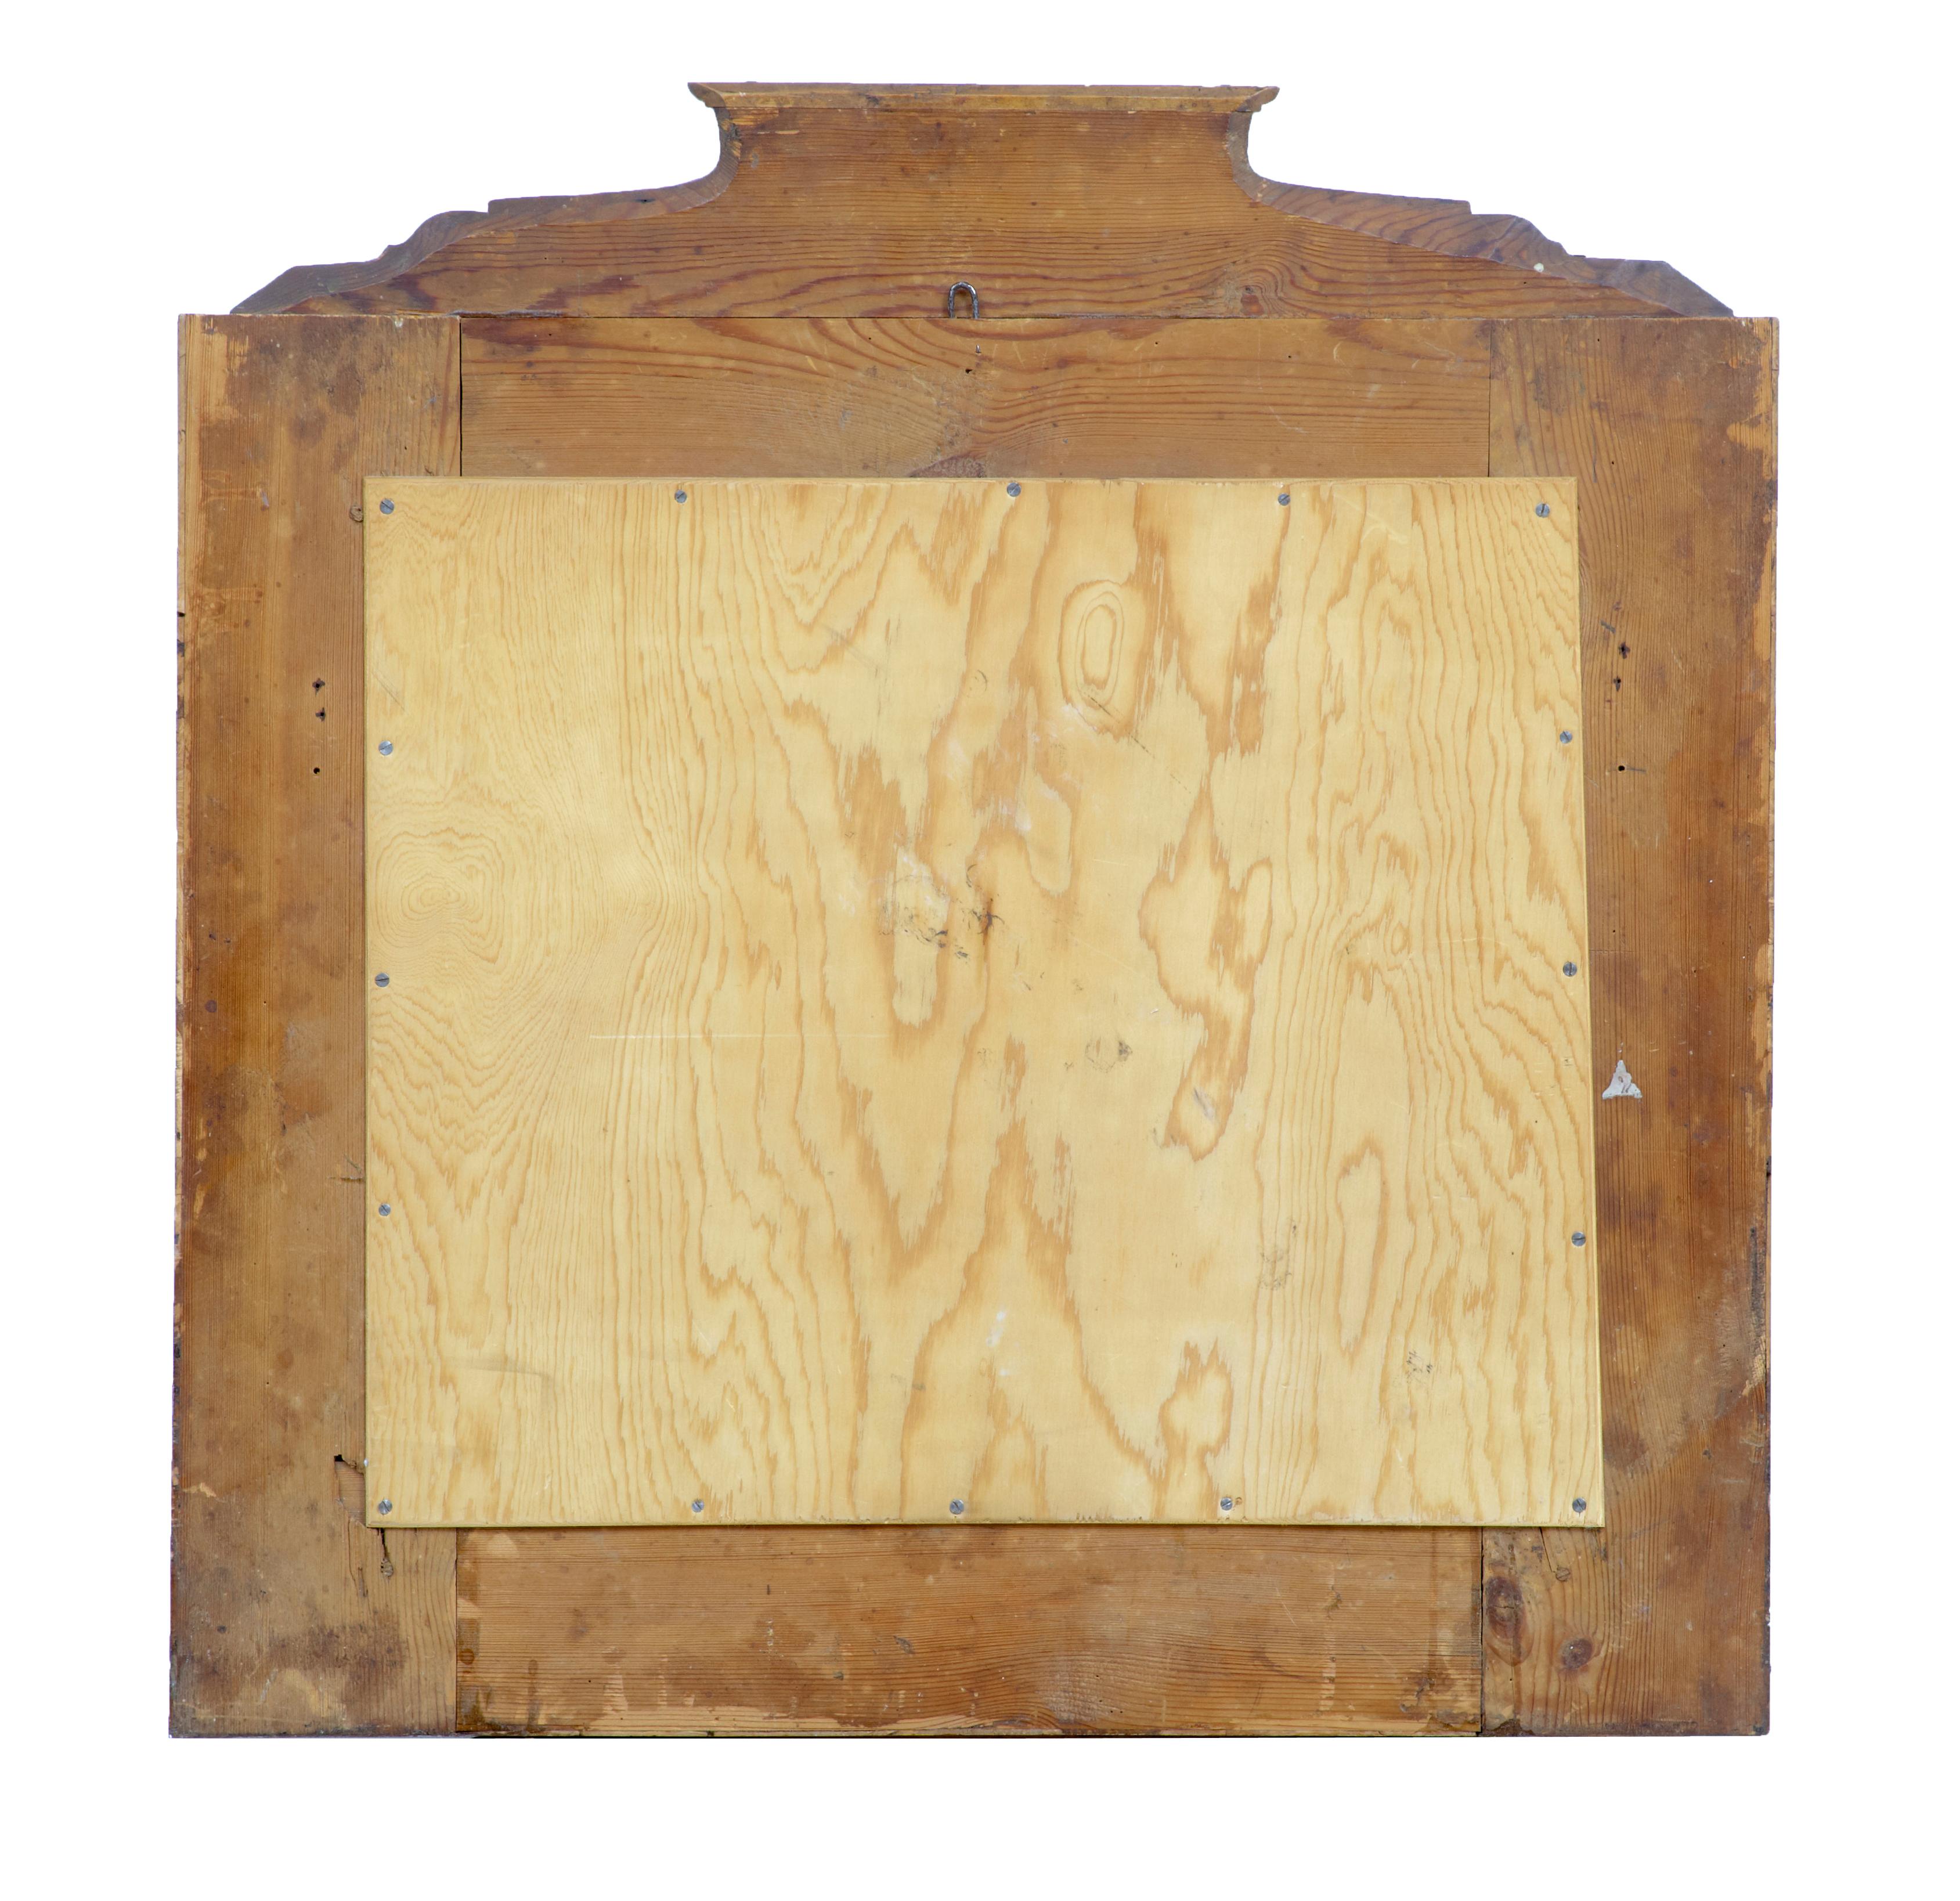 19th century Russian root birch overmantle mirror circa 1830.

Made with quality burr birch. Shaped architectural top, inlaid fans to the inner edge. Ideal size for multi rooms such as bedrooms and cloak rooms.

Good color and patina.

Minor